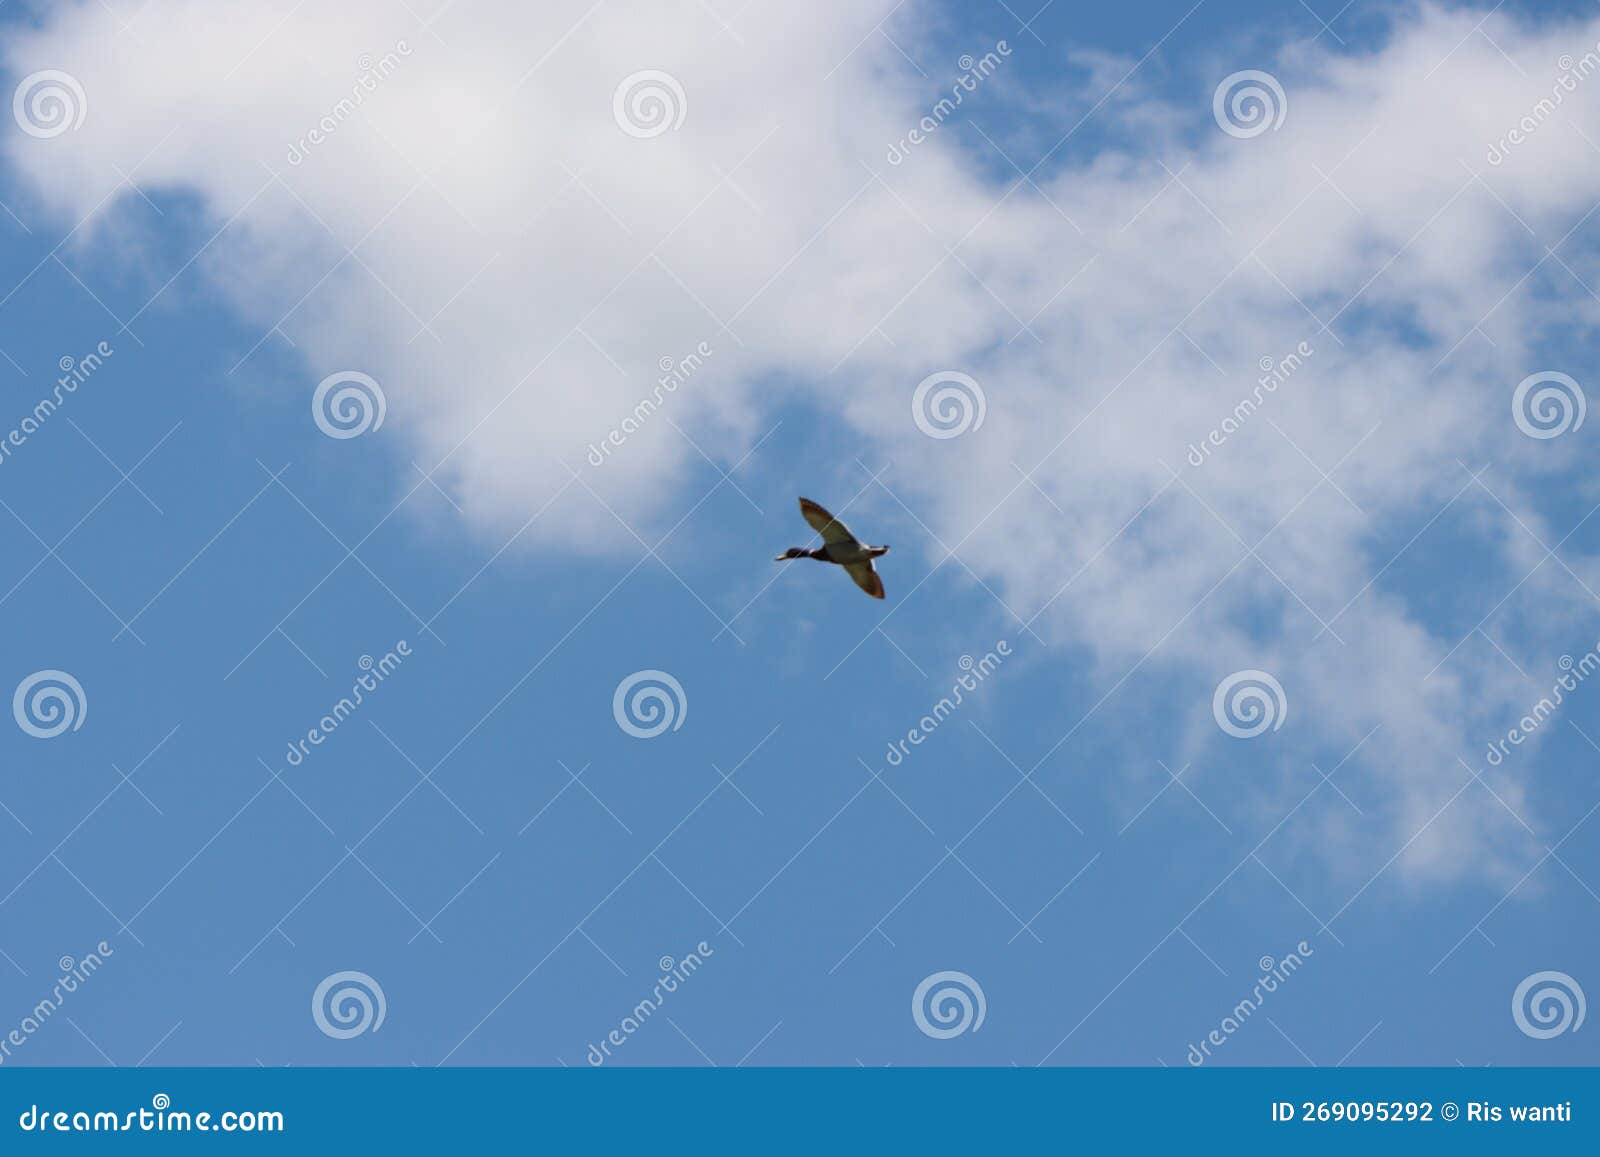 sky background with flying bird. germano reale in volo.